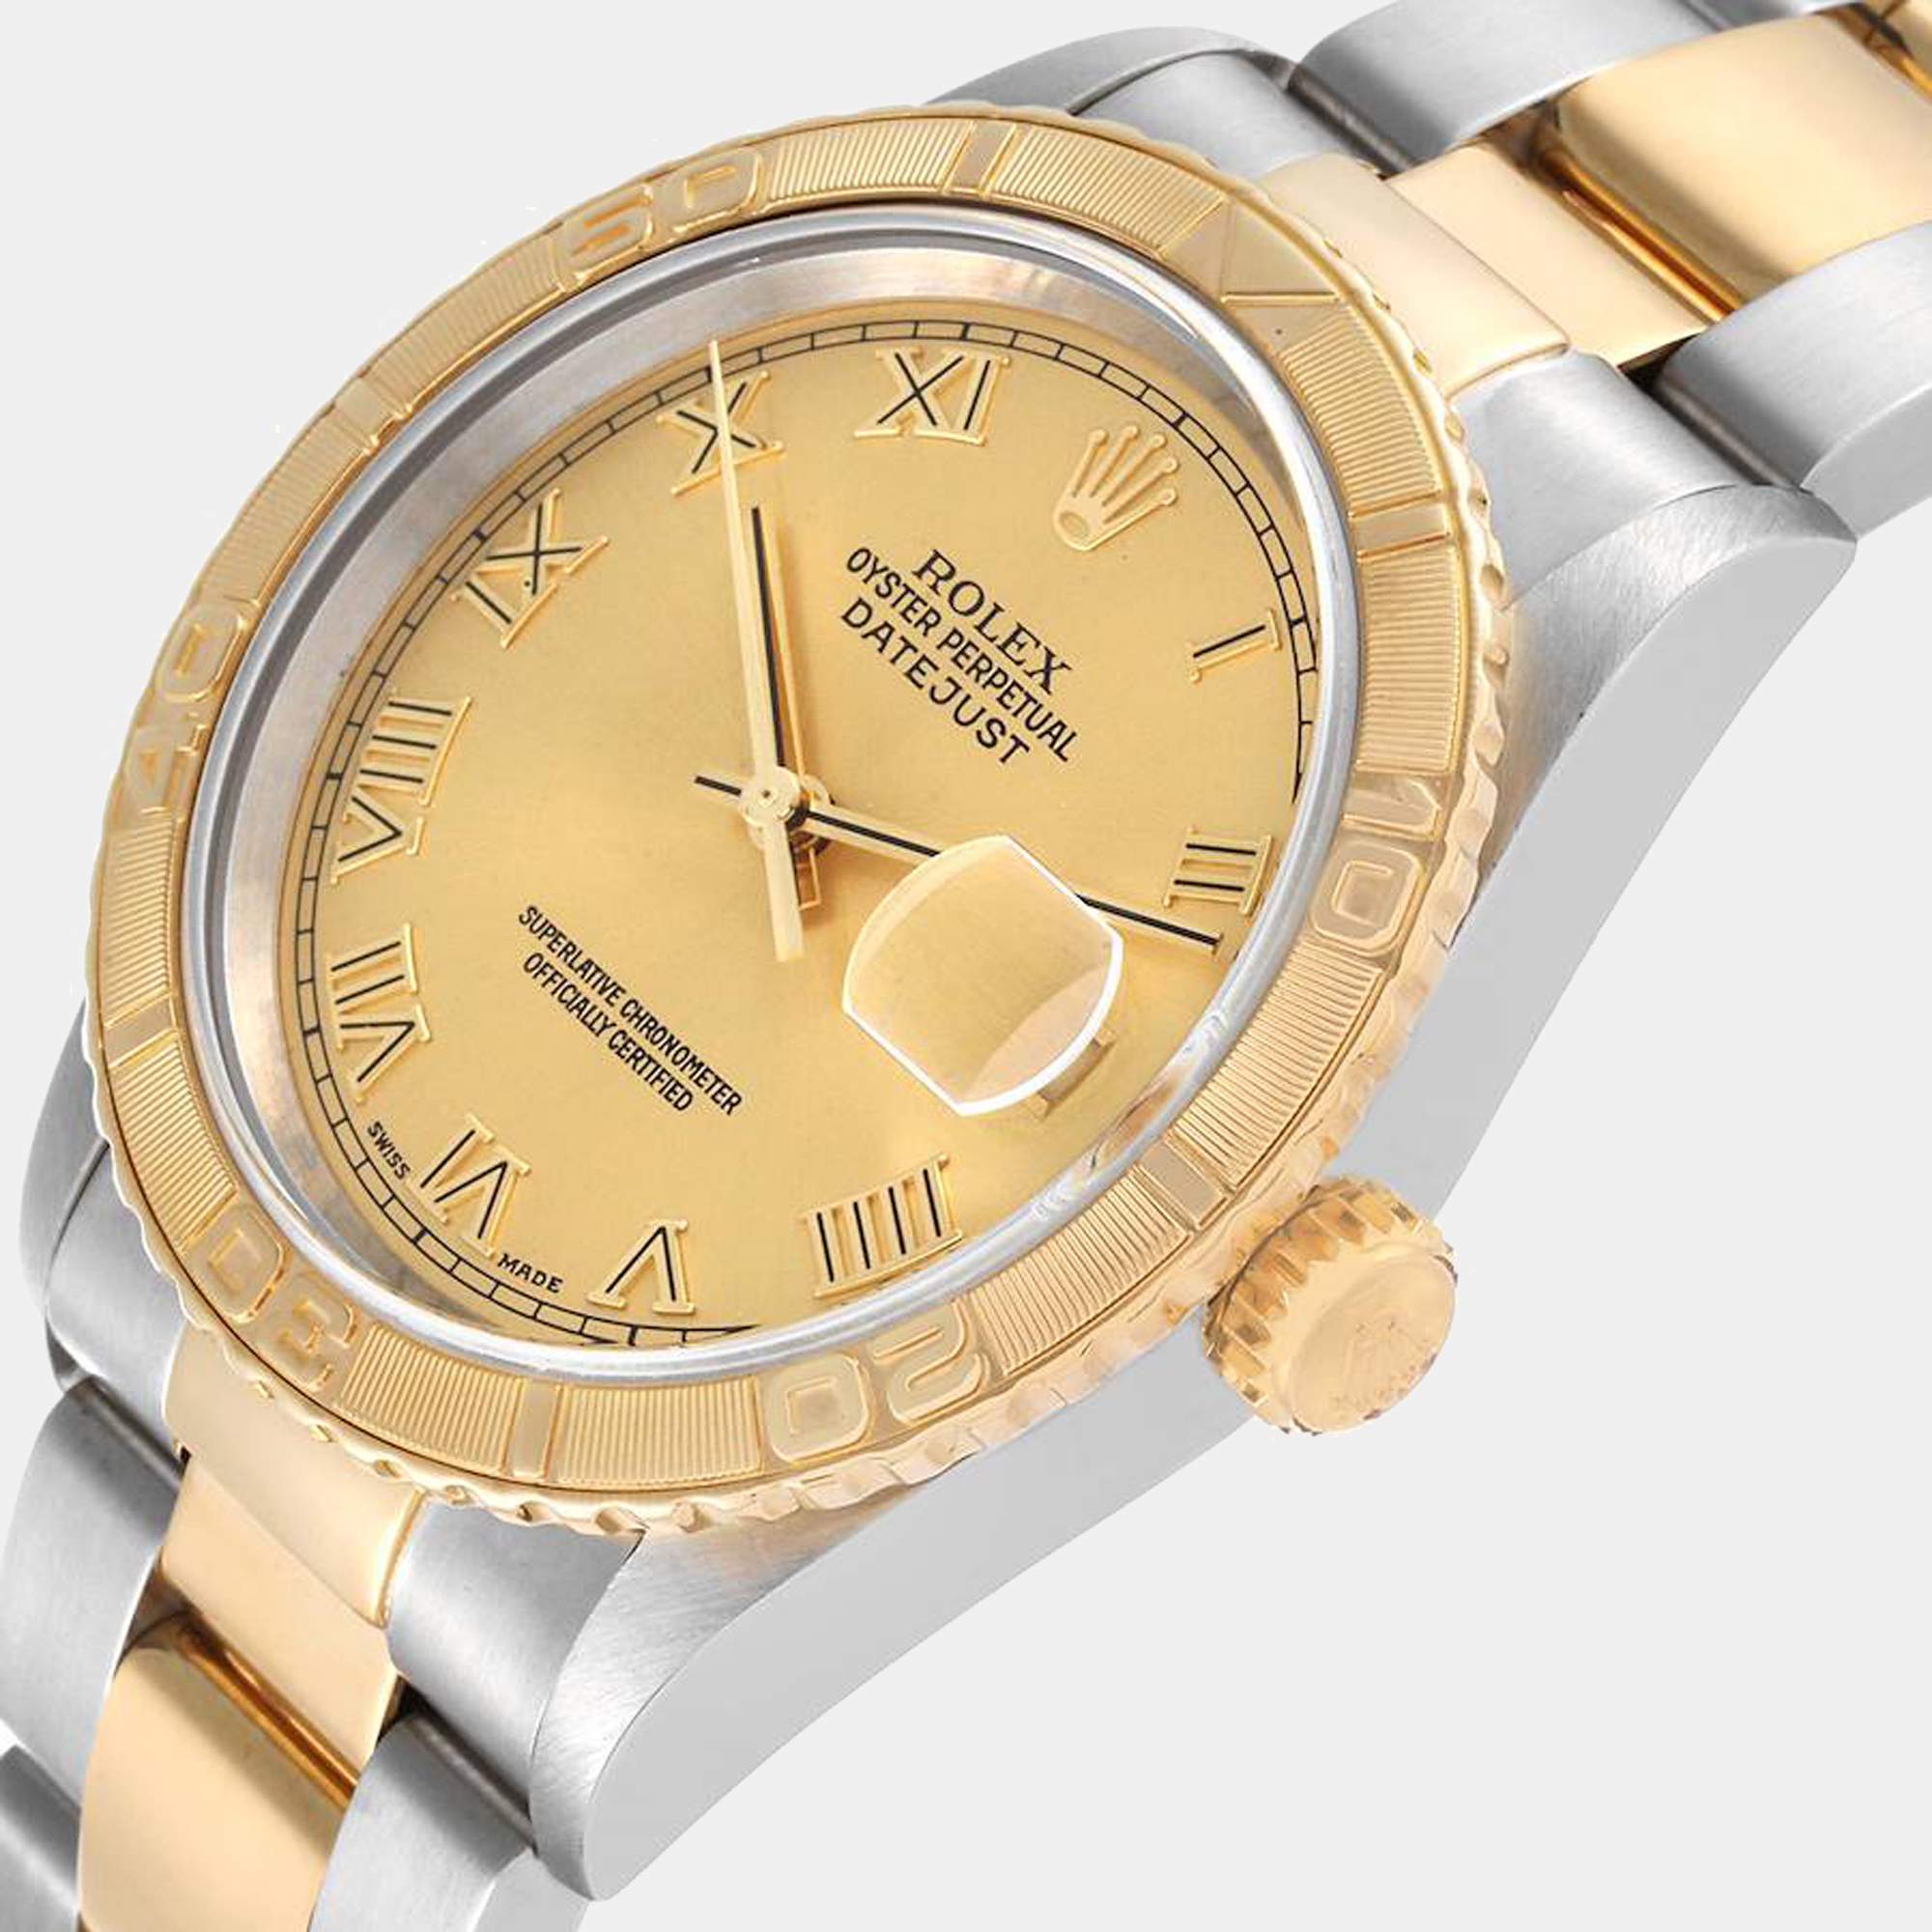 

Rolex Champagne 18K Yellow Gold And Stainless Steel Datejust 16263 Automatic Men's Wristwatch 36 mm